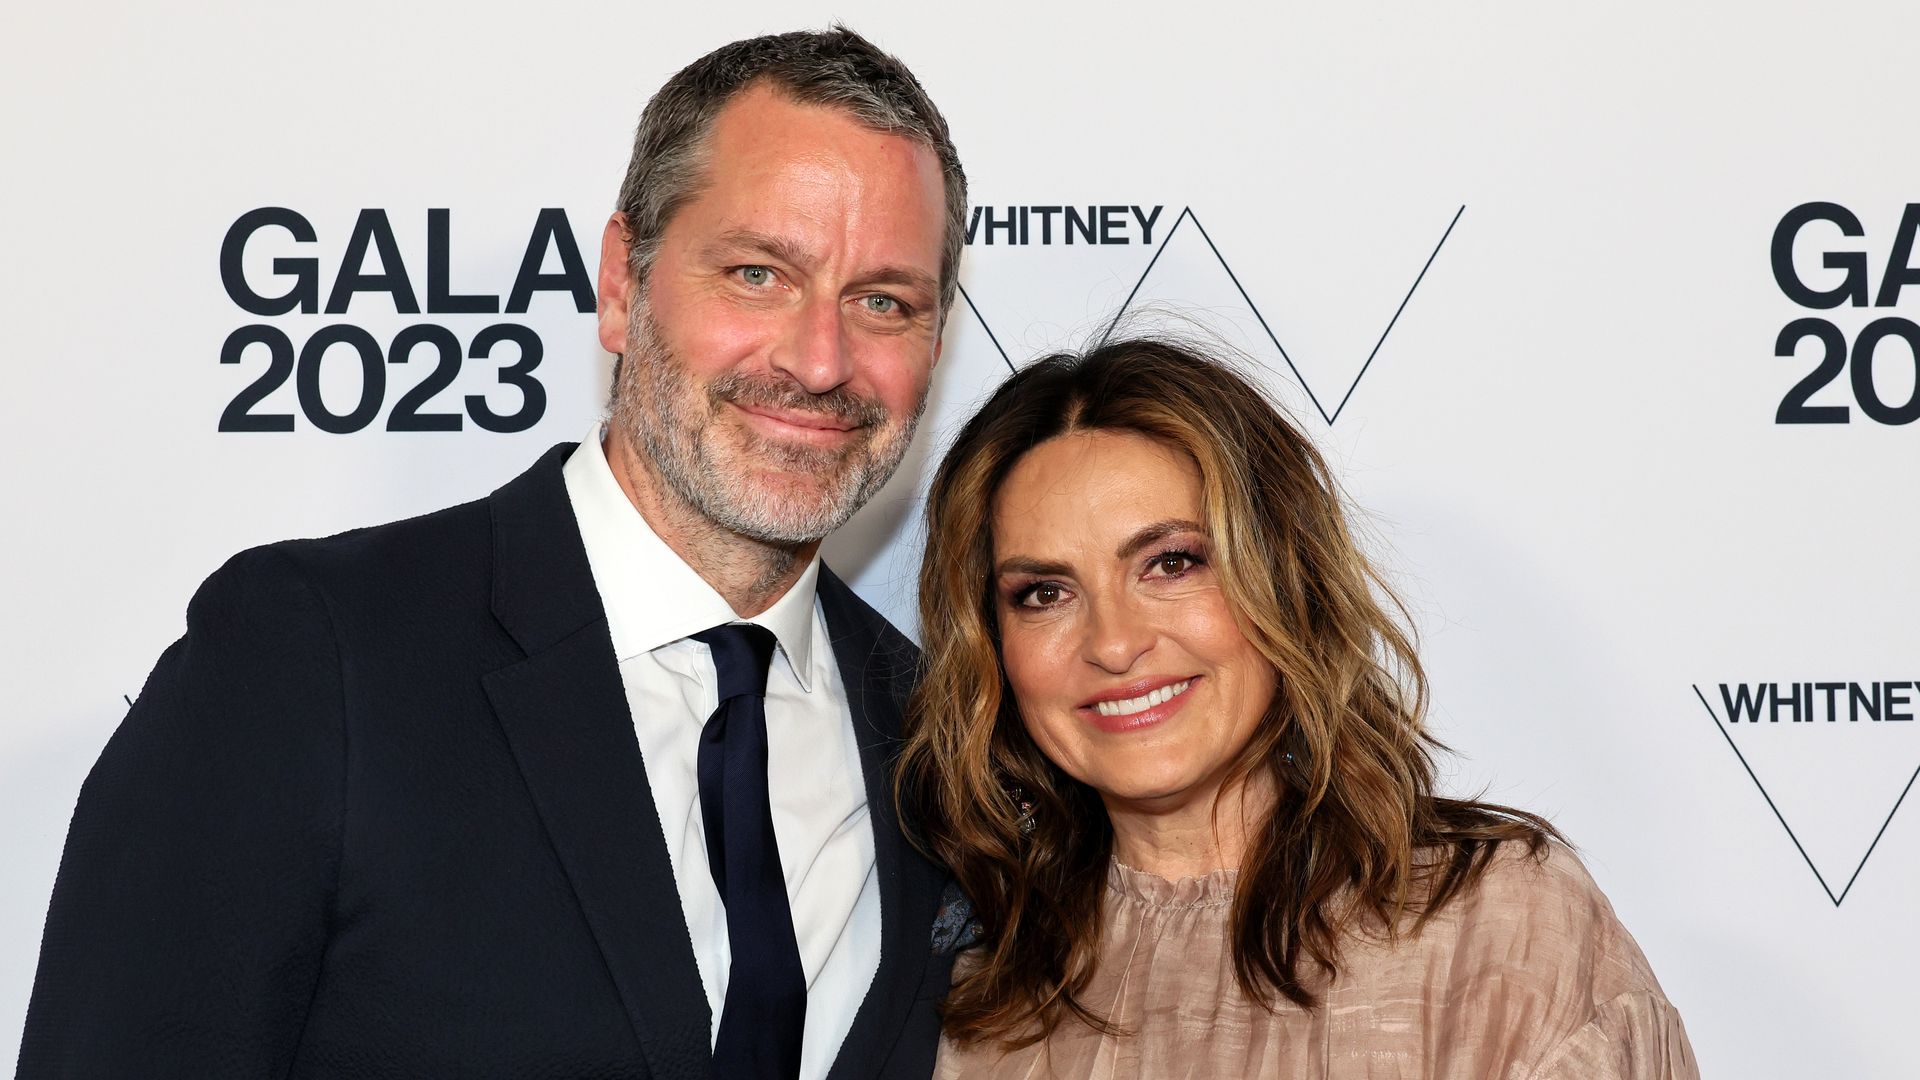 Peter Hermann and Mariska Hargitay attend the 2023 Whitney Gala and Studio Party at The Whitney Museum of American Art 